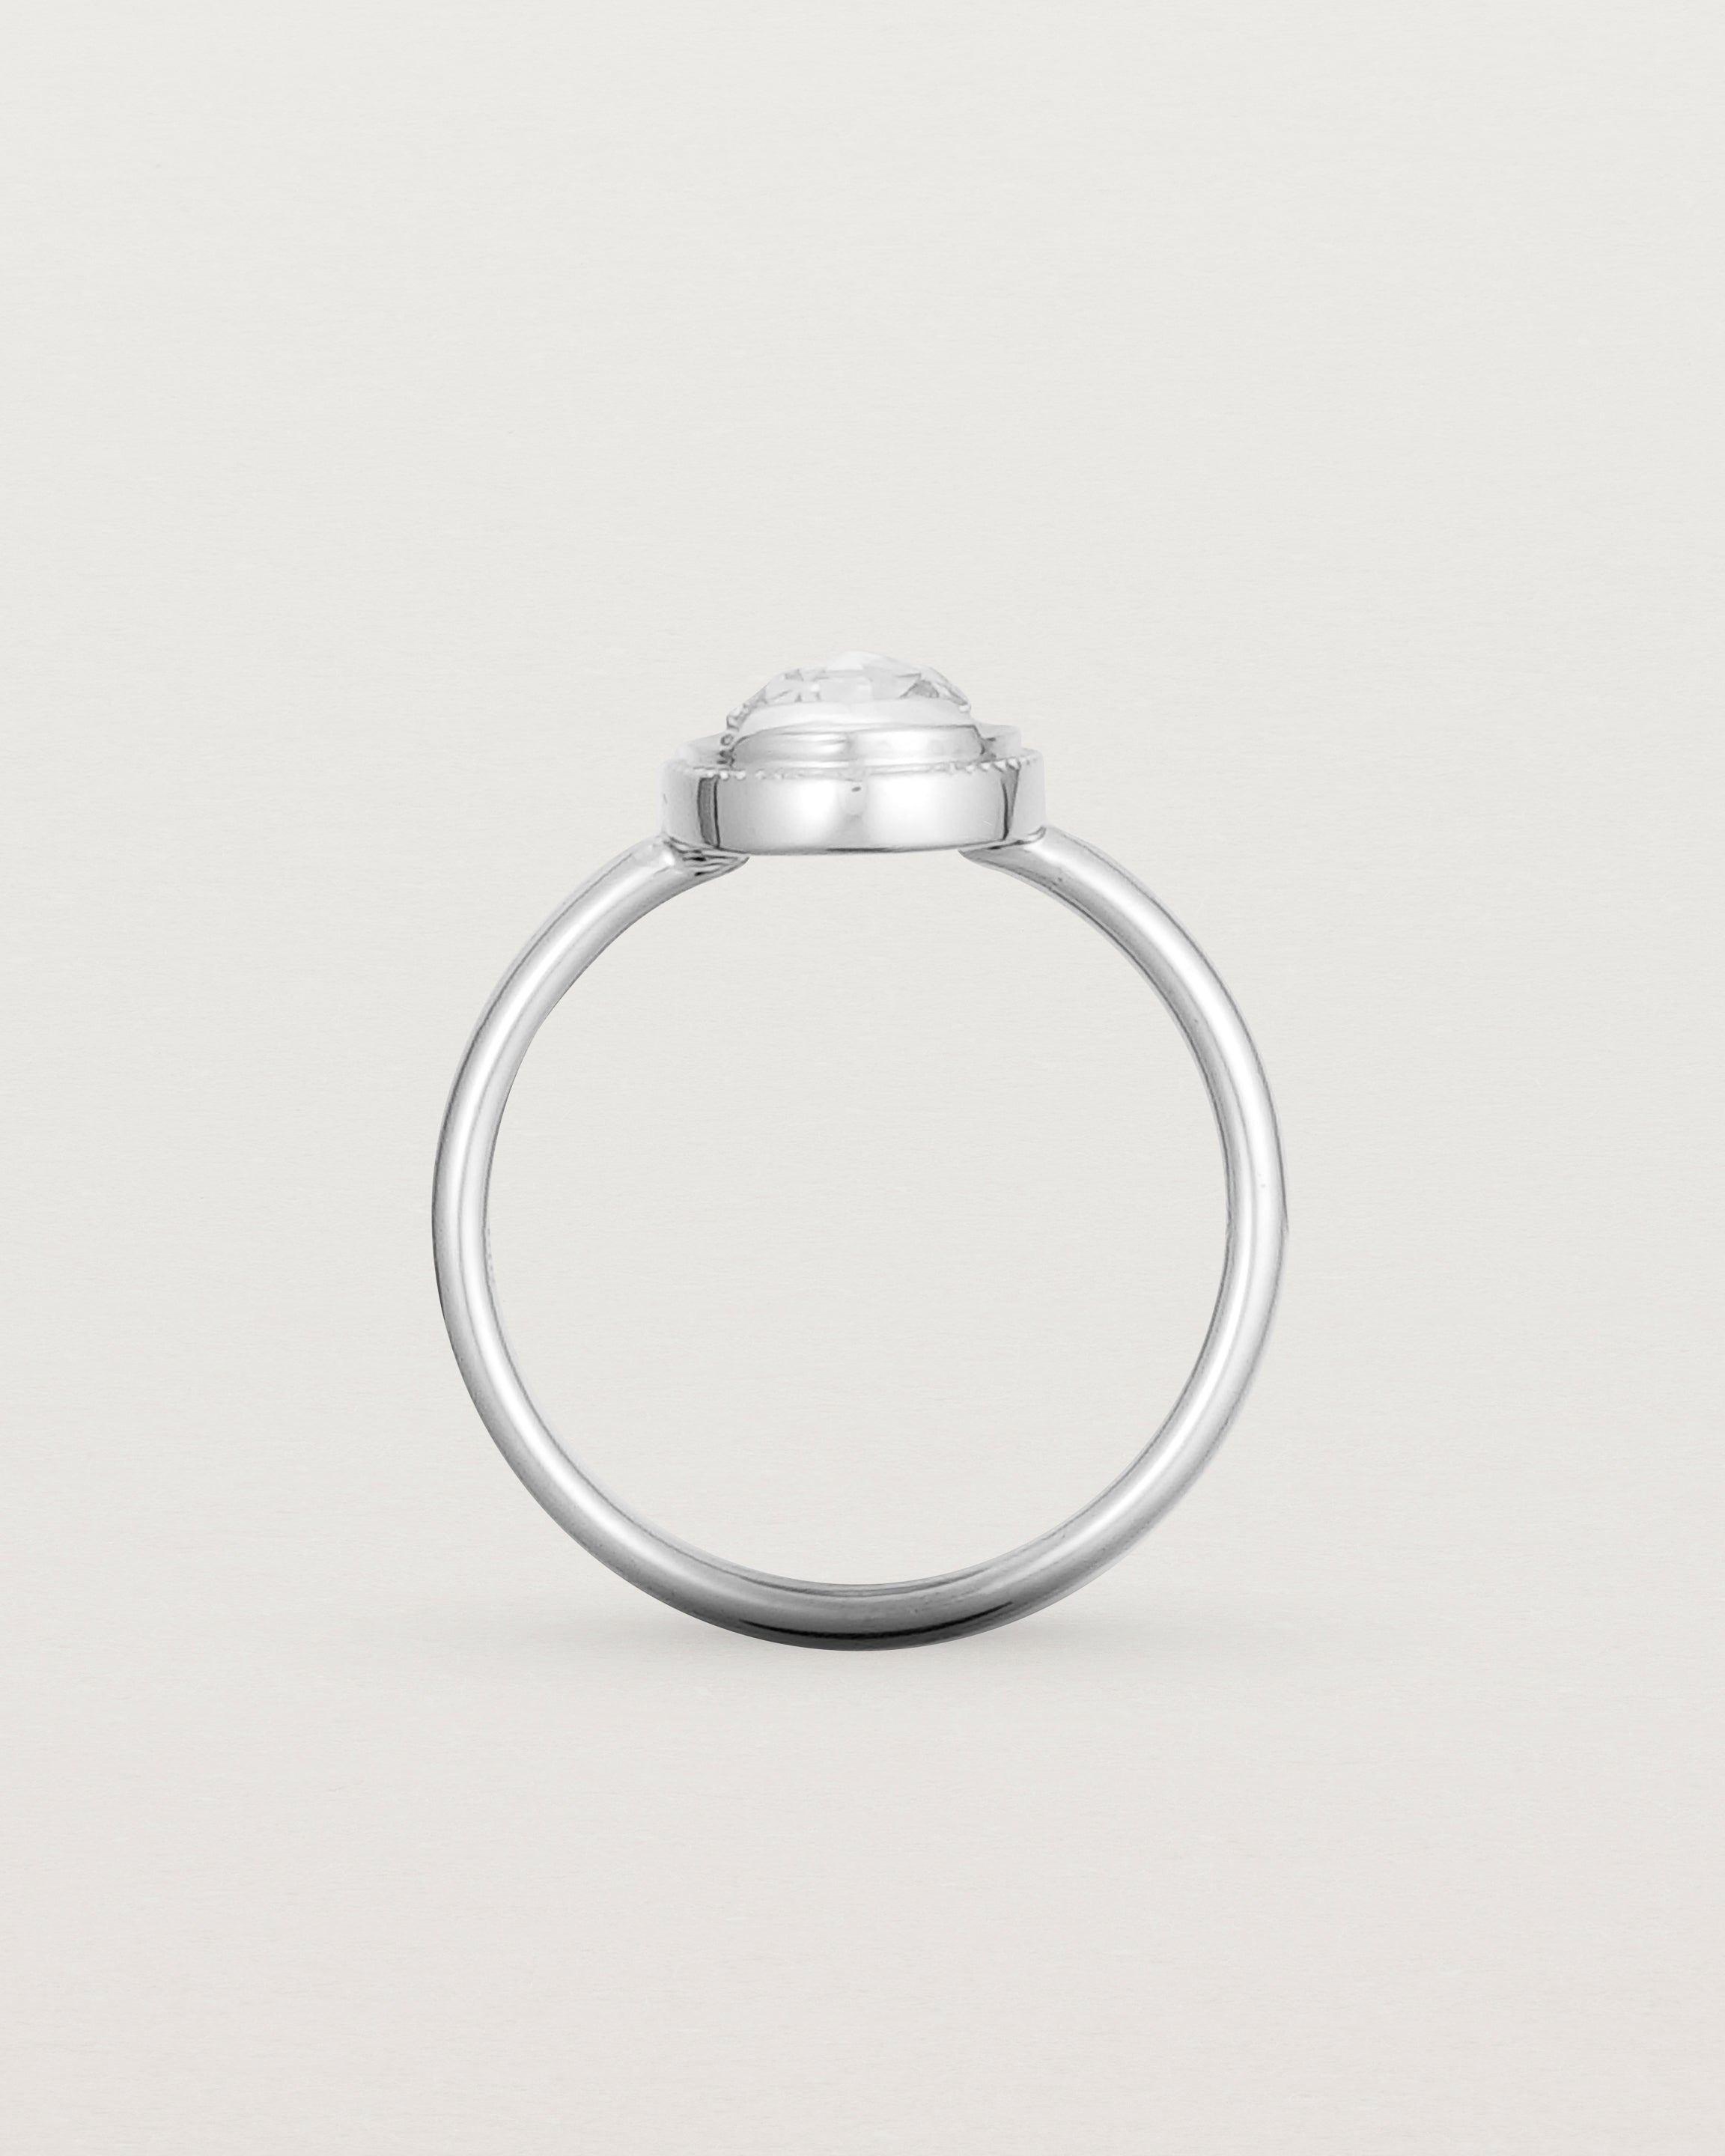 Standing view of the Adeline Rose Cut Ring | Diamond | White Gold.